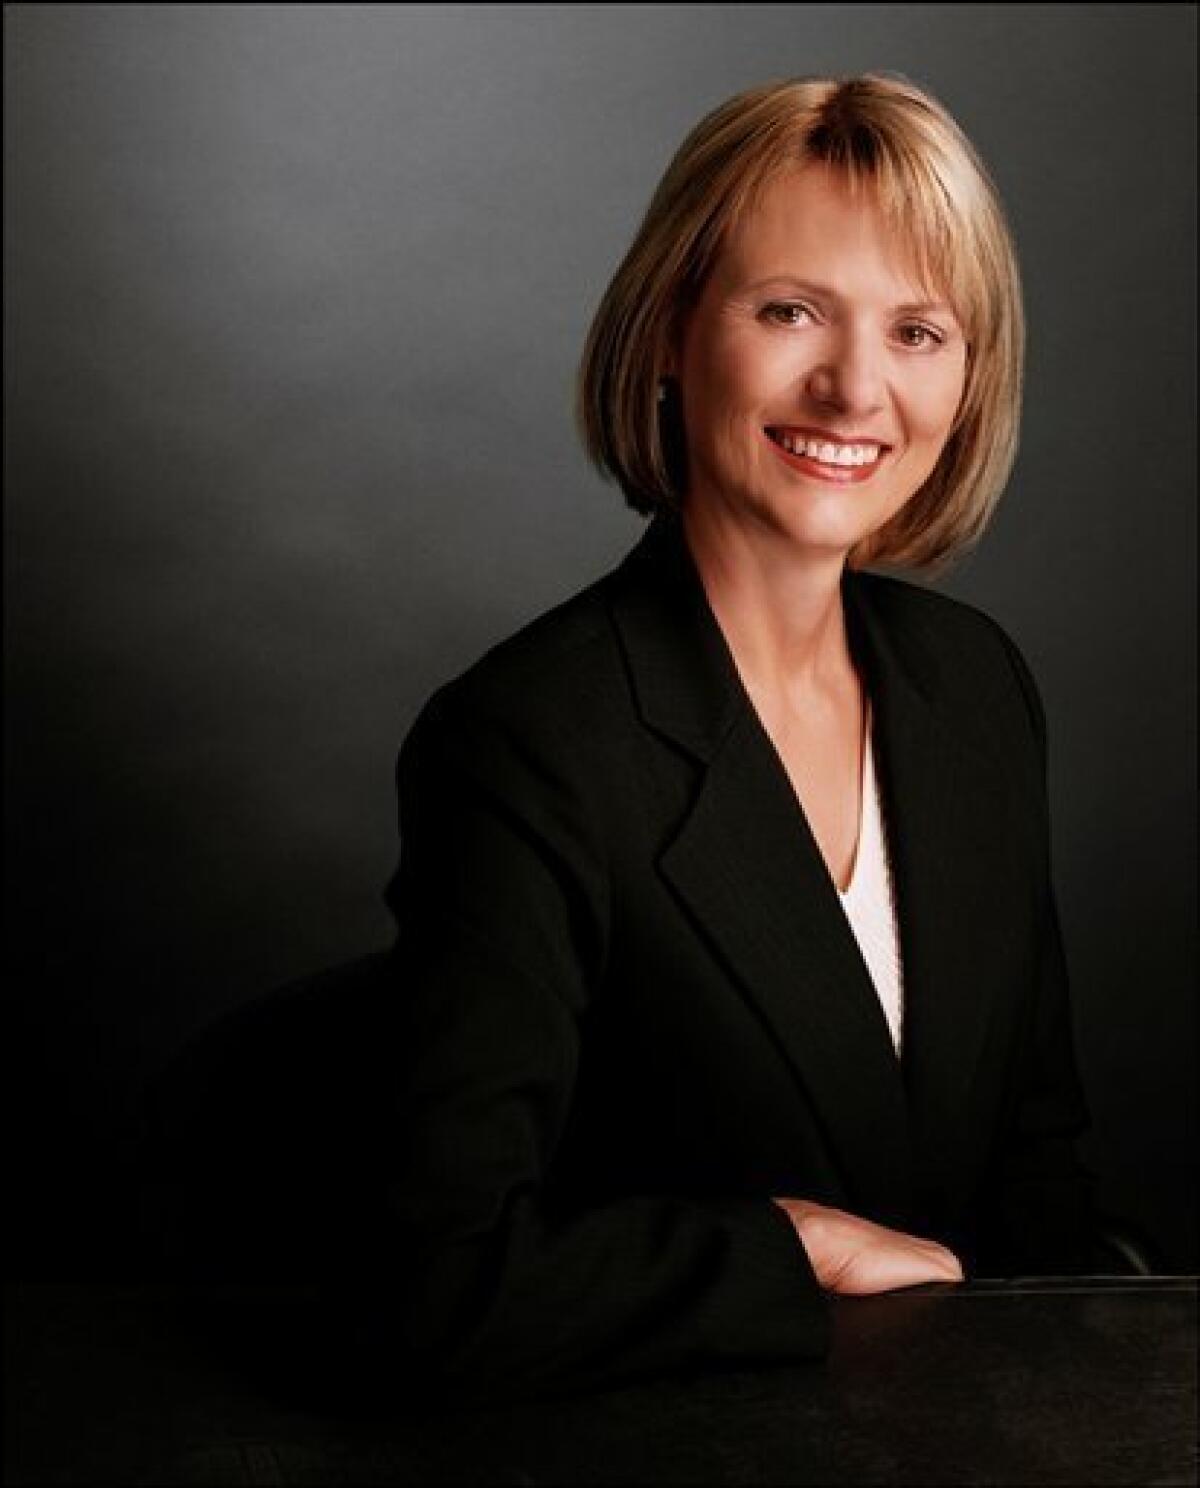 In this undated image provided by Autodesk Inc., Carol Bartz, executive chairman and then CEO of Autodesk, is shown. Yahoo Inc. appears to have settled on Bartz as its new chief executive, ushering in a no-nonsense leader known for developing a clear focus _ something that has eluded the struggling Internet company during a three-year slump. (AP Photo/Autodesk)